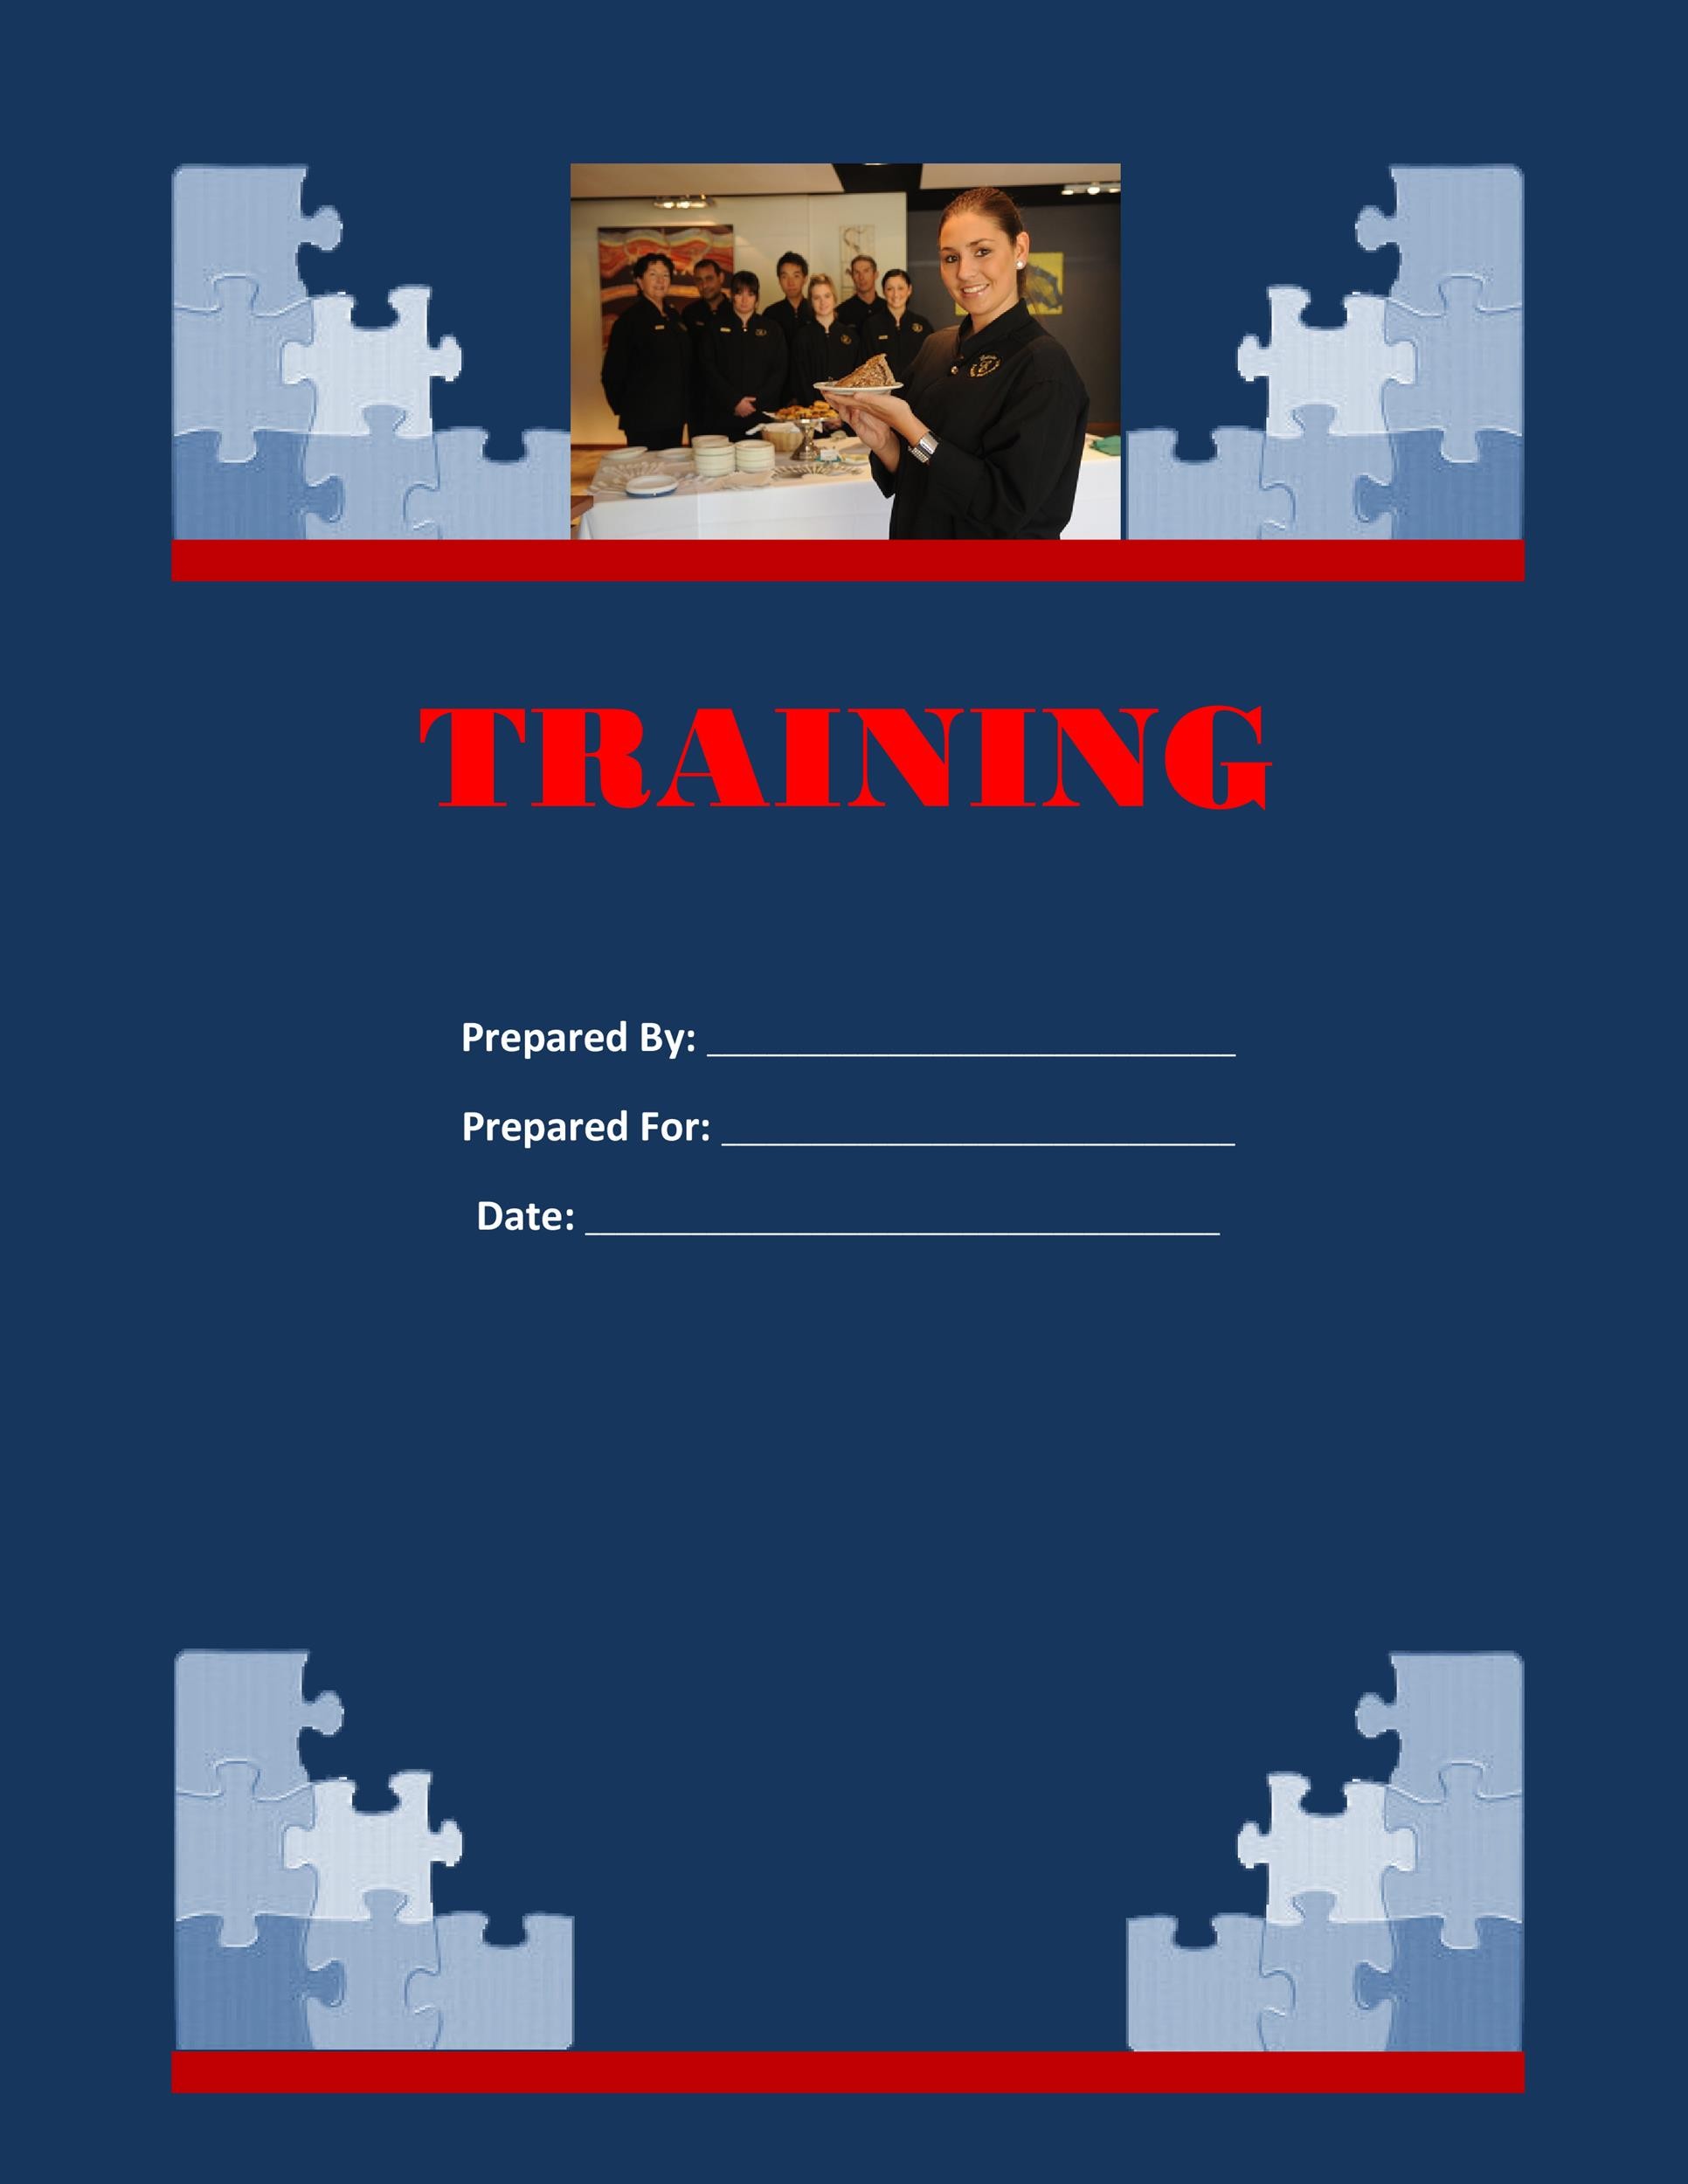 Training Manual 40+ Free Templates & Examples in MS Word